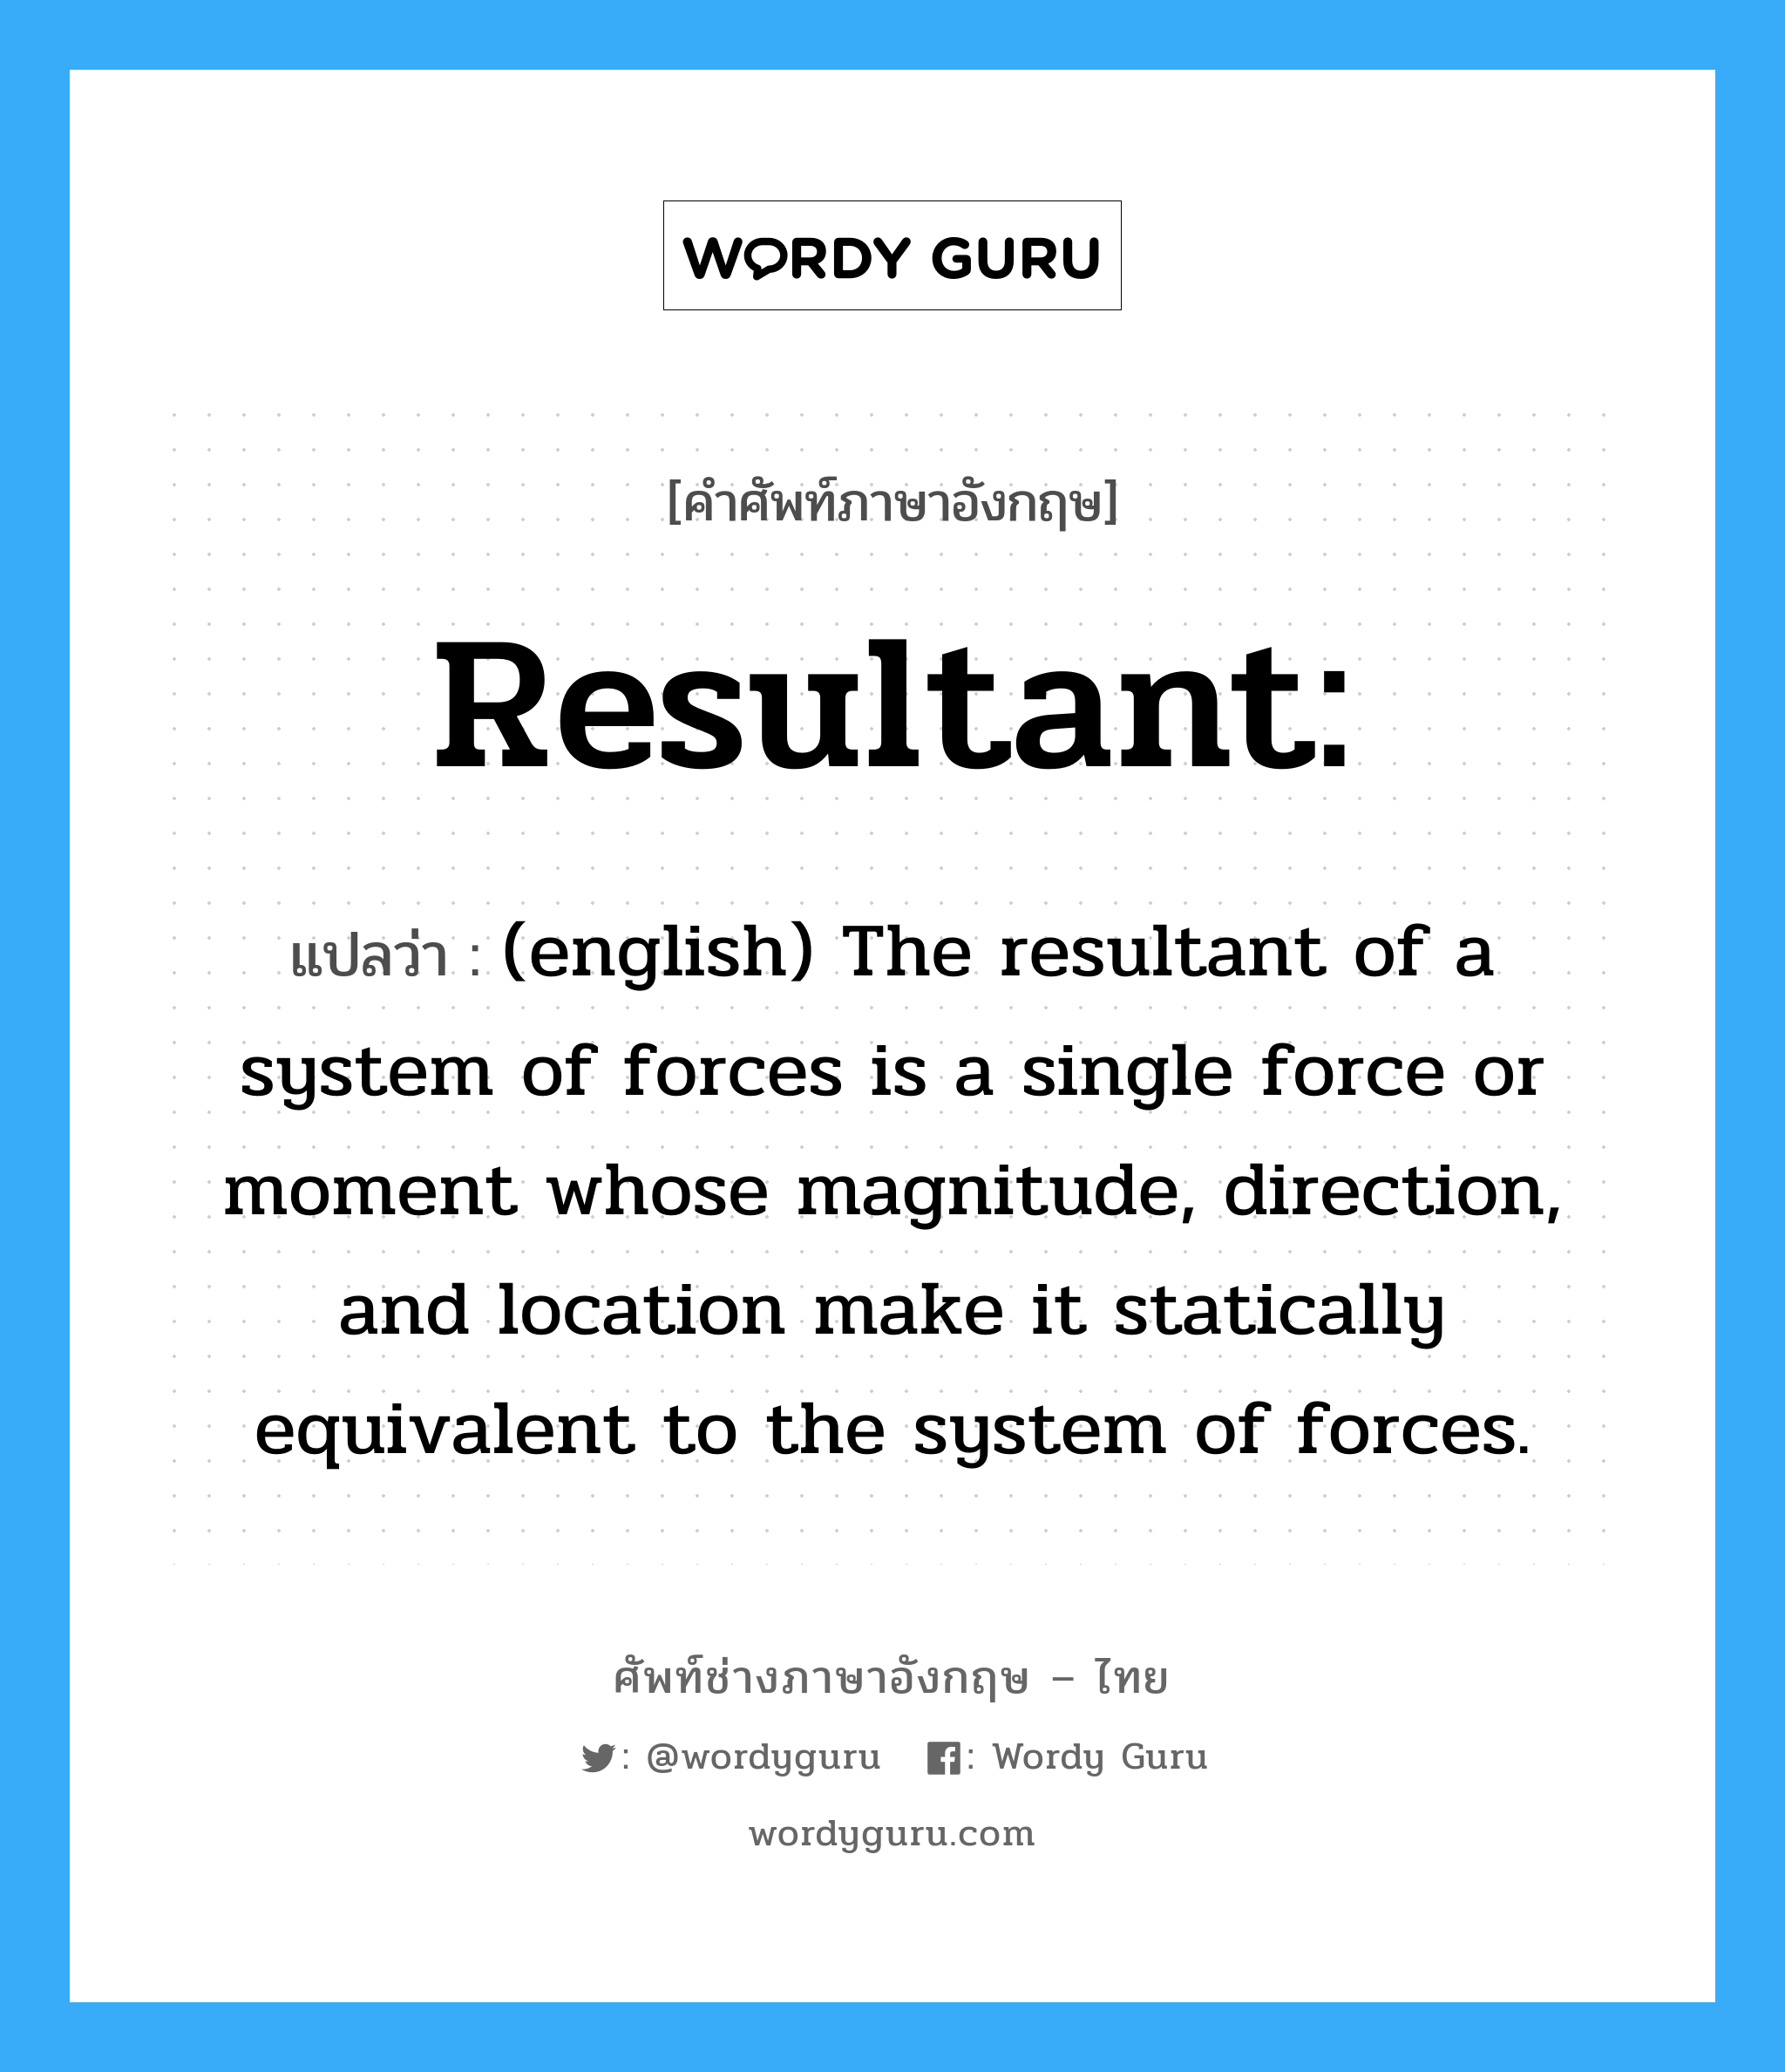 Resultant: แปลว่า?, คำศัพท์ช่างภาษาอังกฤษ - ไทย Resultant: คำศัพท์ภาษาอังกฤษ Resultant: แปลว่า (english) The resultant of a system of forces is a single force or moment whose magnitude, direction, and location make it statically equivalent to the system of forces.